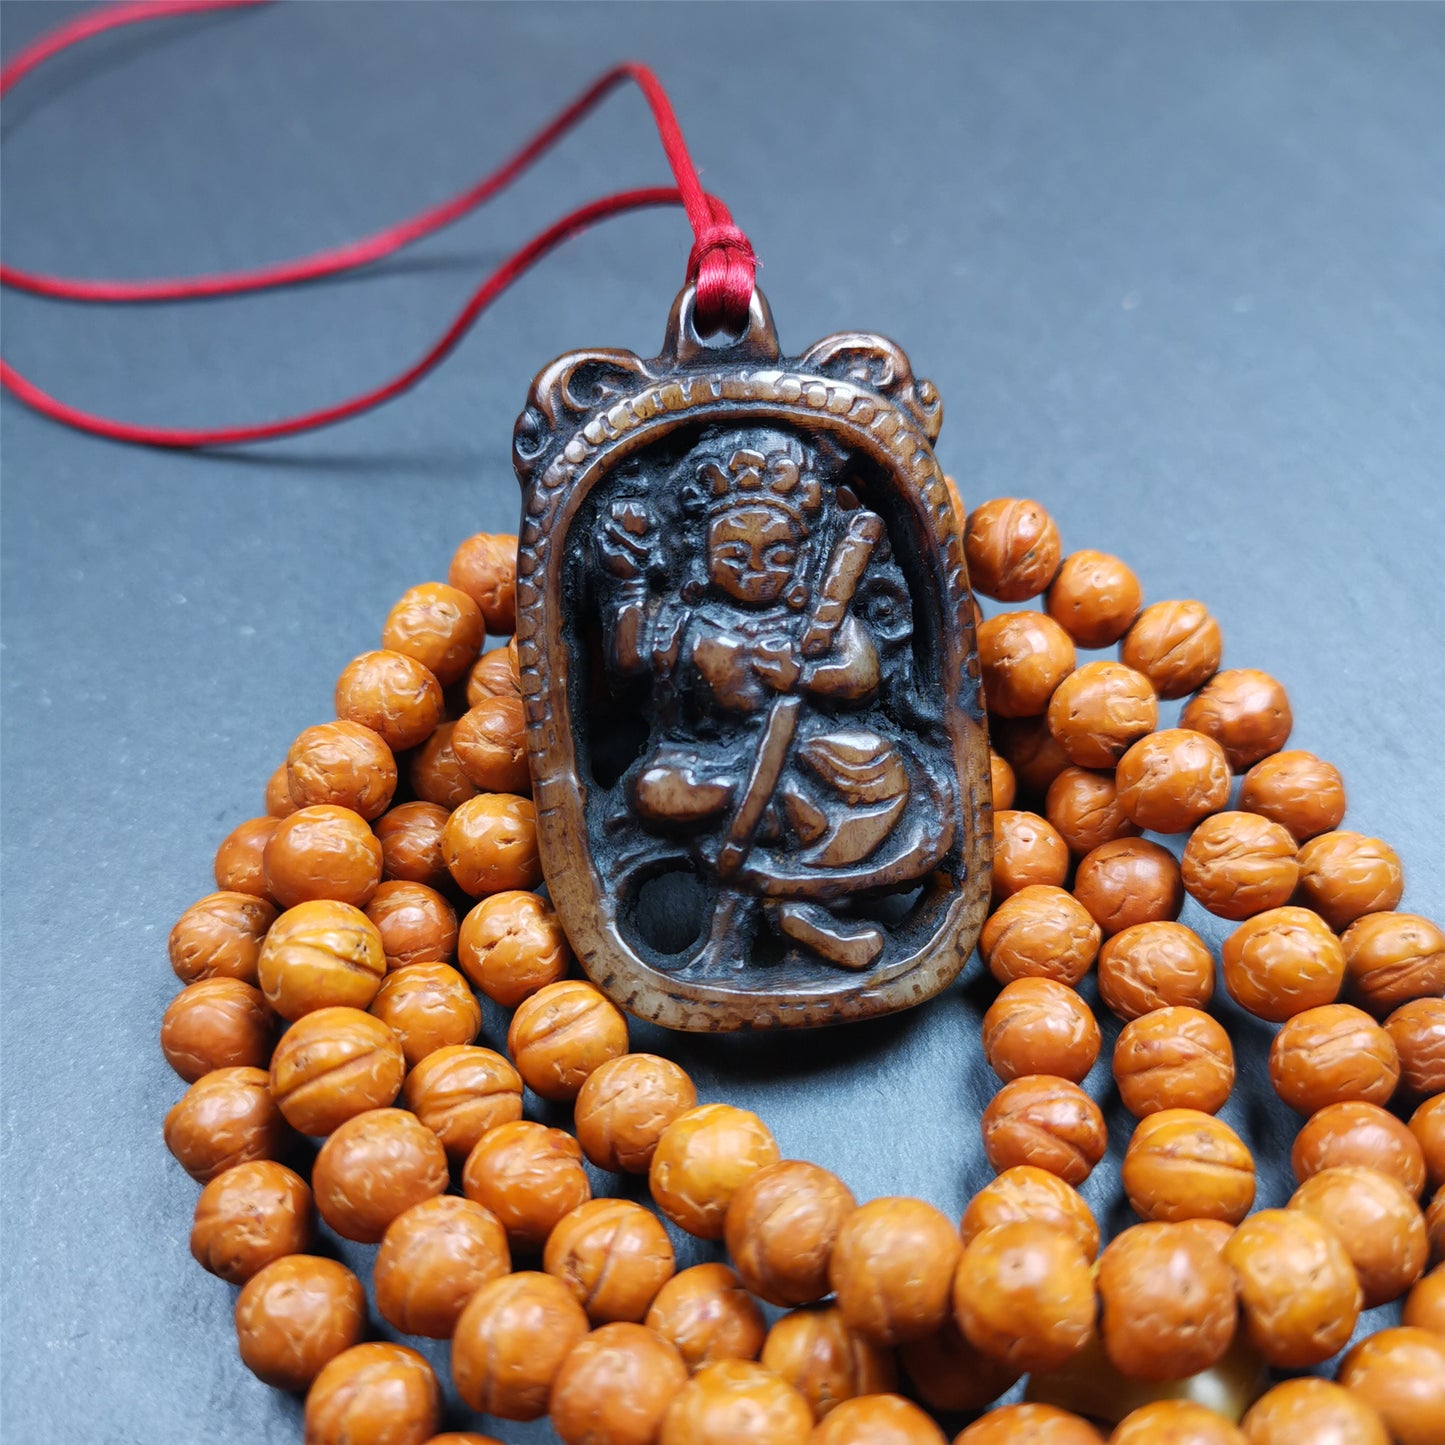 This Troma Nagmo amulet was collected from Gerze Tibet, hand carved by Tibetan Craft man. It is made of yak bone,brown color,size is 2.16" × 1.3". You can make it necklace,or just put into your shrine. Troma Nagmo literally means the Black Wrathful Lady. She is included in the Dharmapala pantheon as a form of Vajravarahi. She is also the feminine embodiment of w